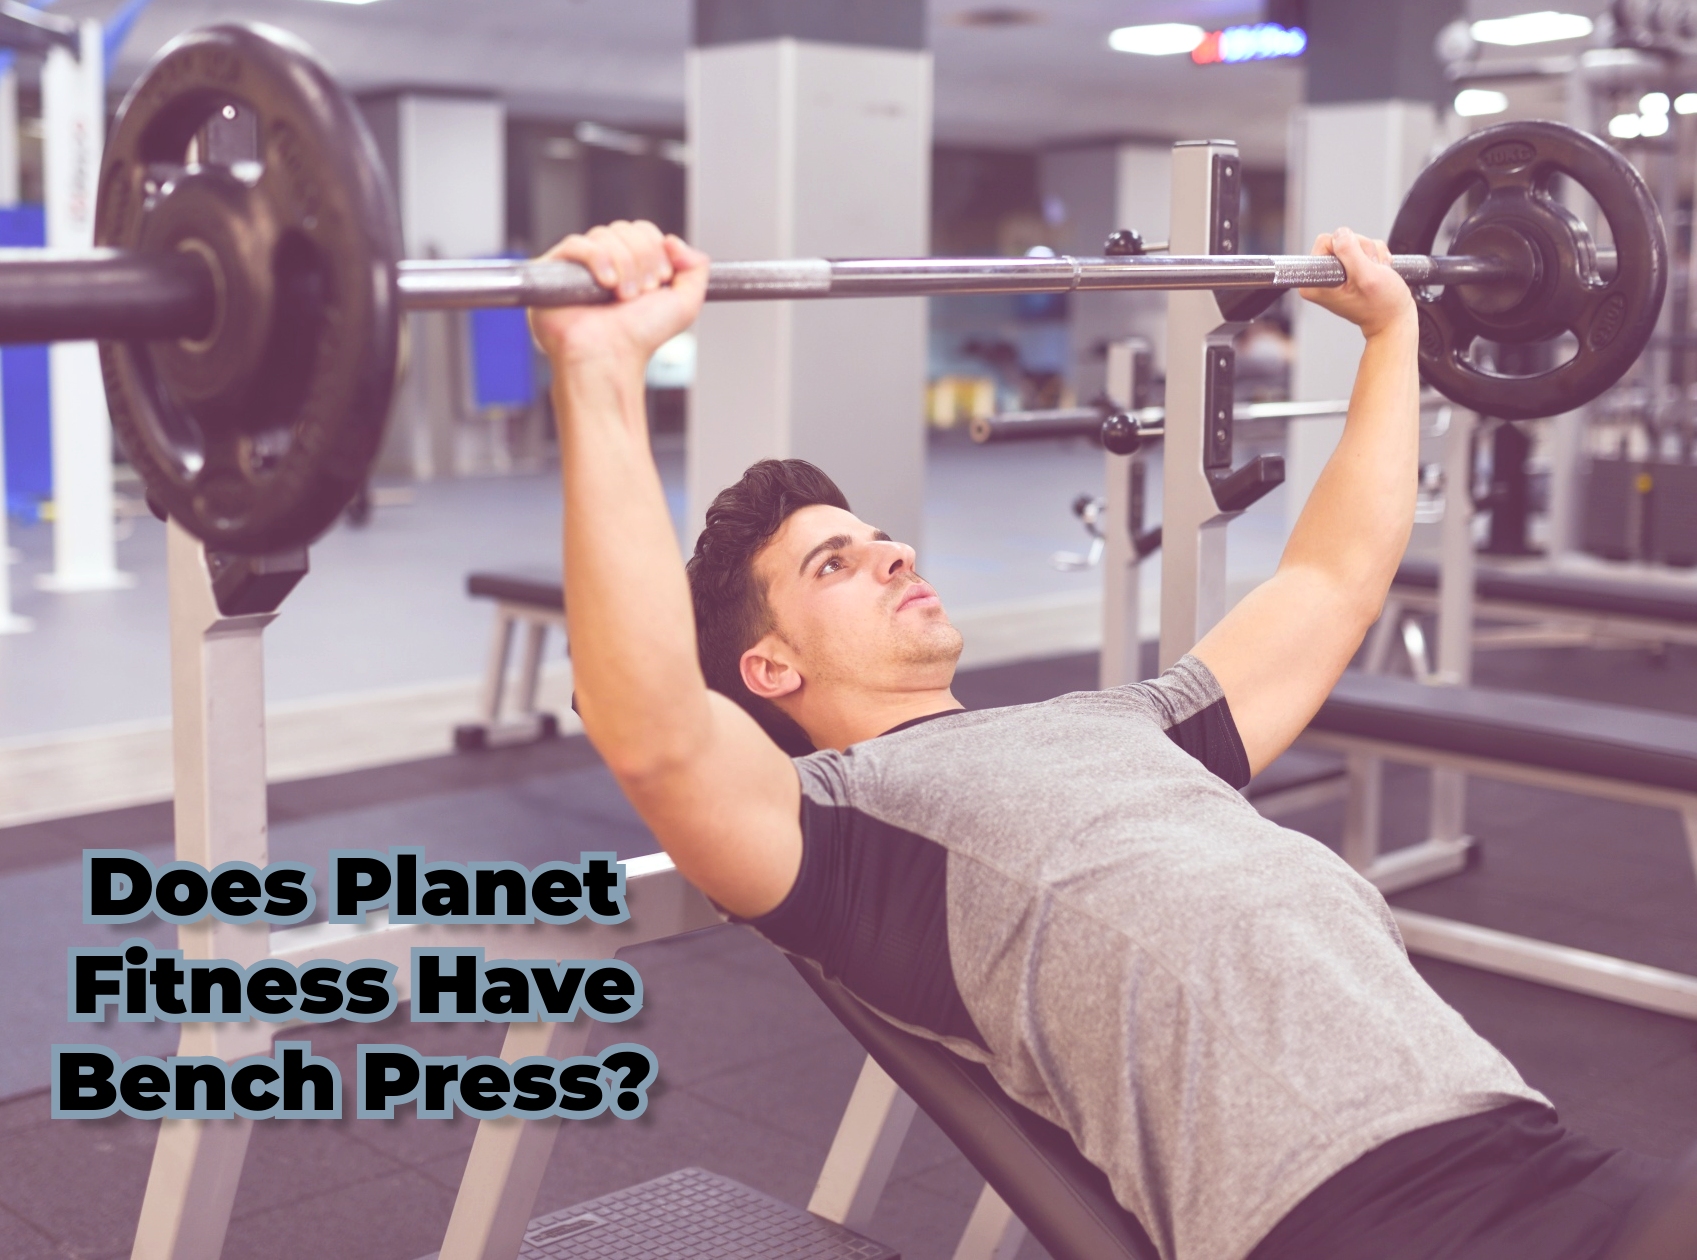 Does Planet Fitness Have Bench Press?